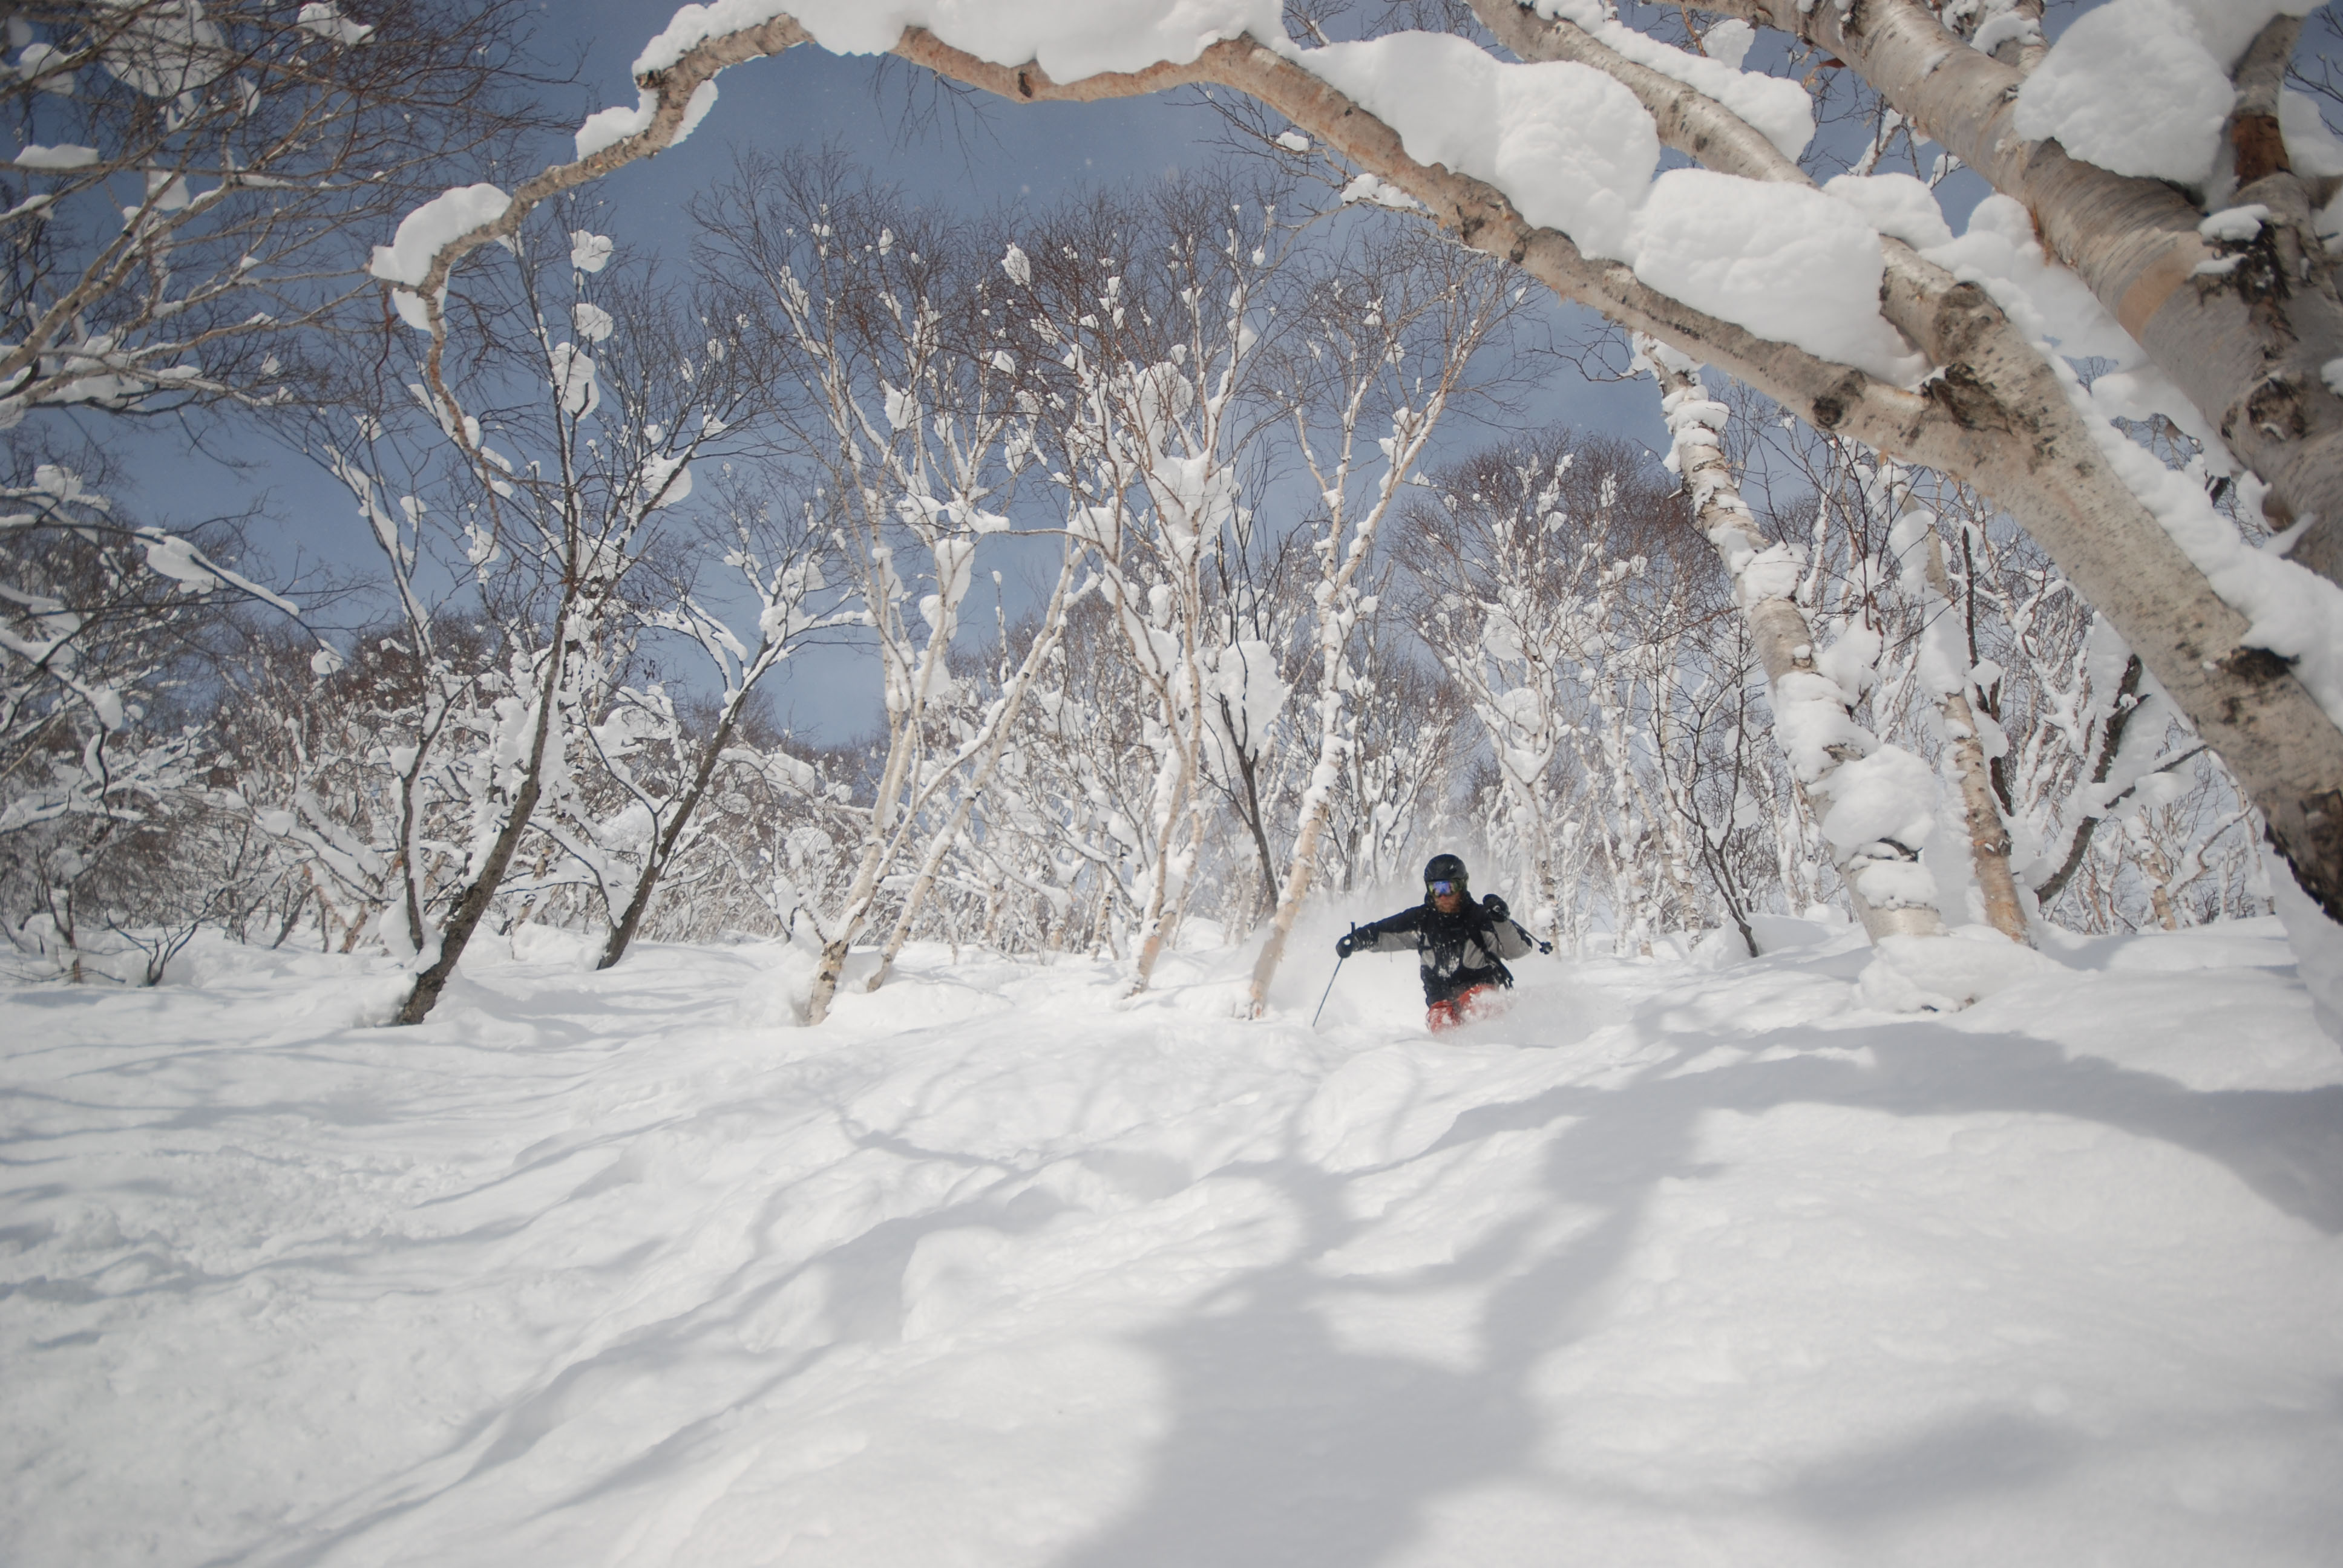 Call Of The Powder Sublime Snow In Japan The Japan Times in Incredible  how to ski powder in trees intended for The house